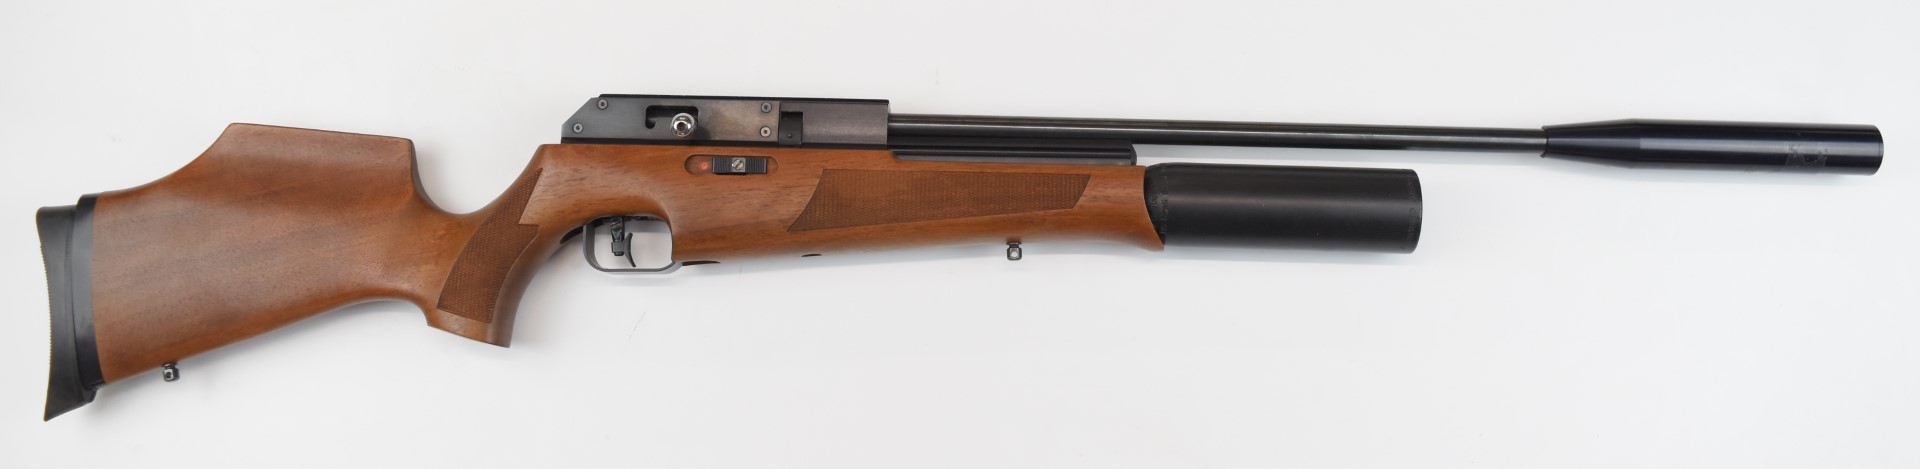 BSA .177 PCP air rifle with chequered semi-pistol grip and forend, sling mounts, adjustable - Image 2 of 19